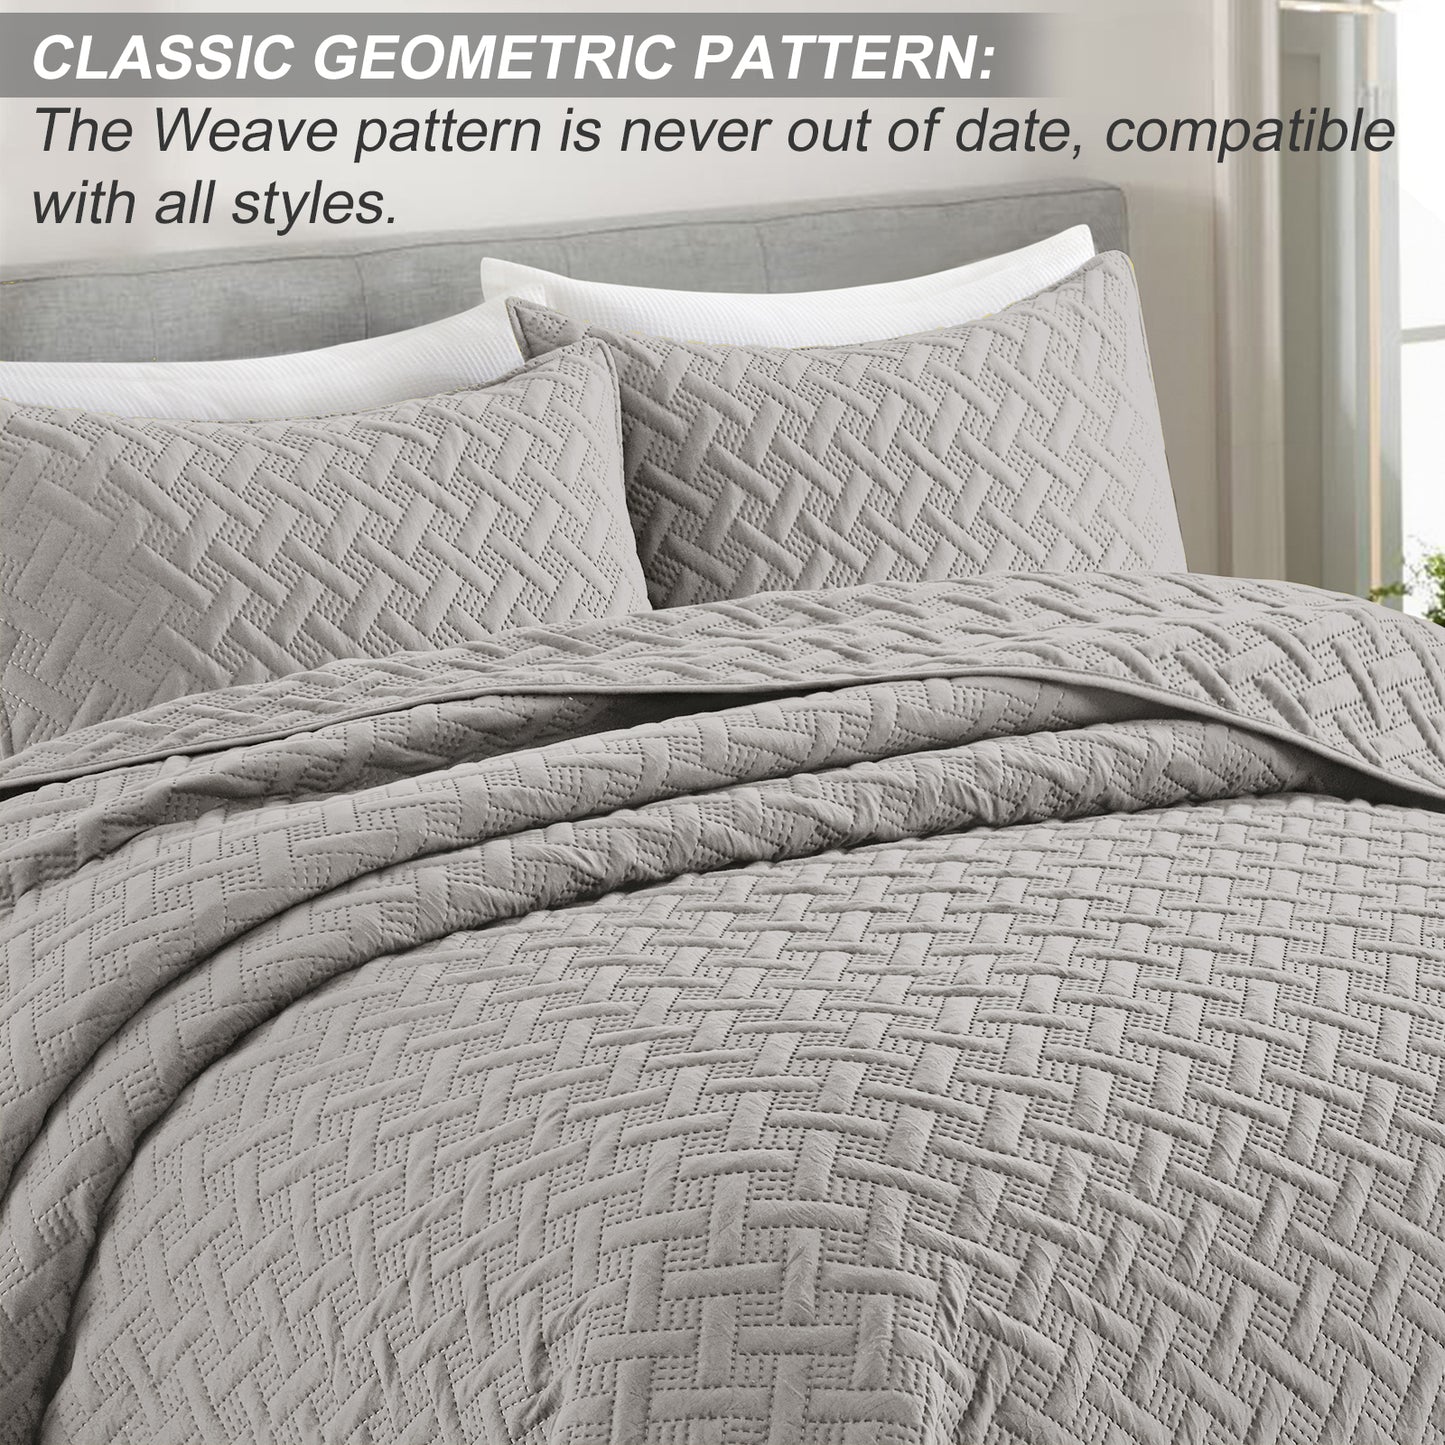 Exclusivo Mezcla 2-Piece Light Gray Twin Size Quilt Set, Weave Pattern Ultrasonic Lightweight and Soft Quilts/Bedspreads/Coverlets/Bedding Set (1 Quilt, 1 Pillow Sham) for All Seasons